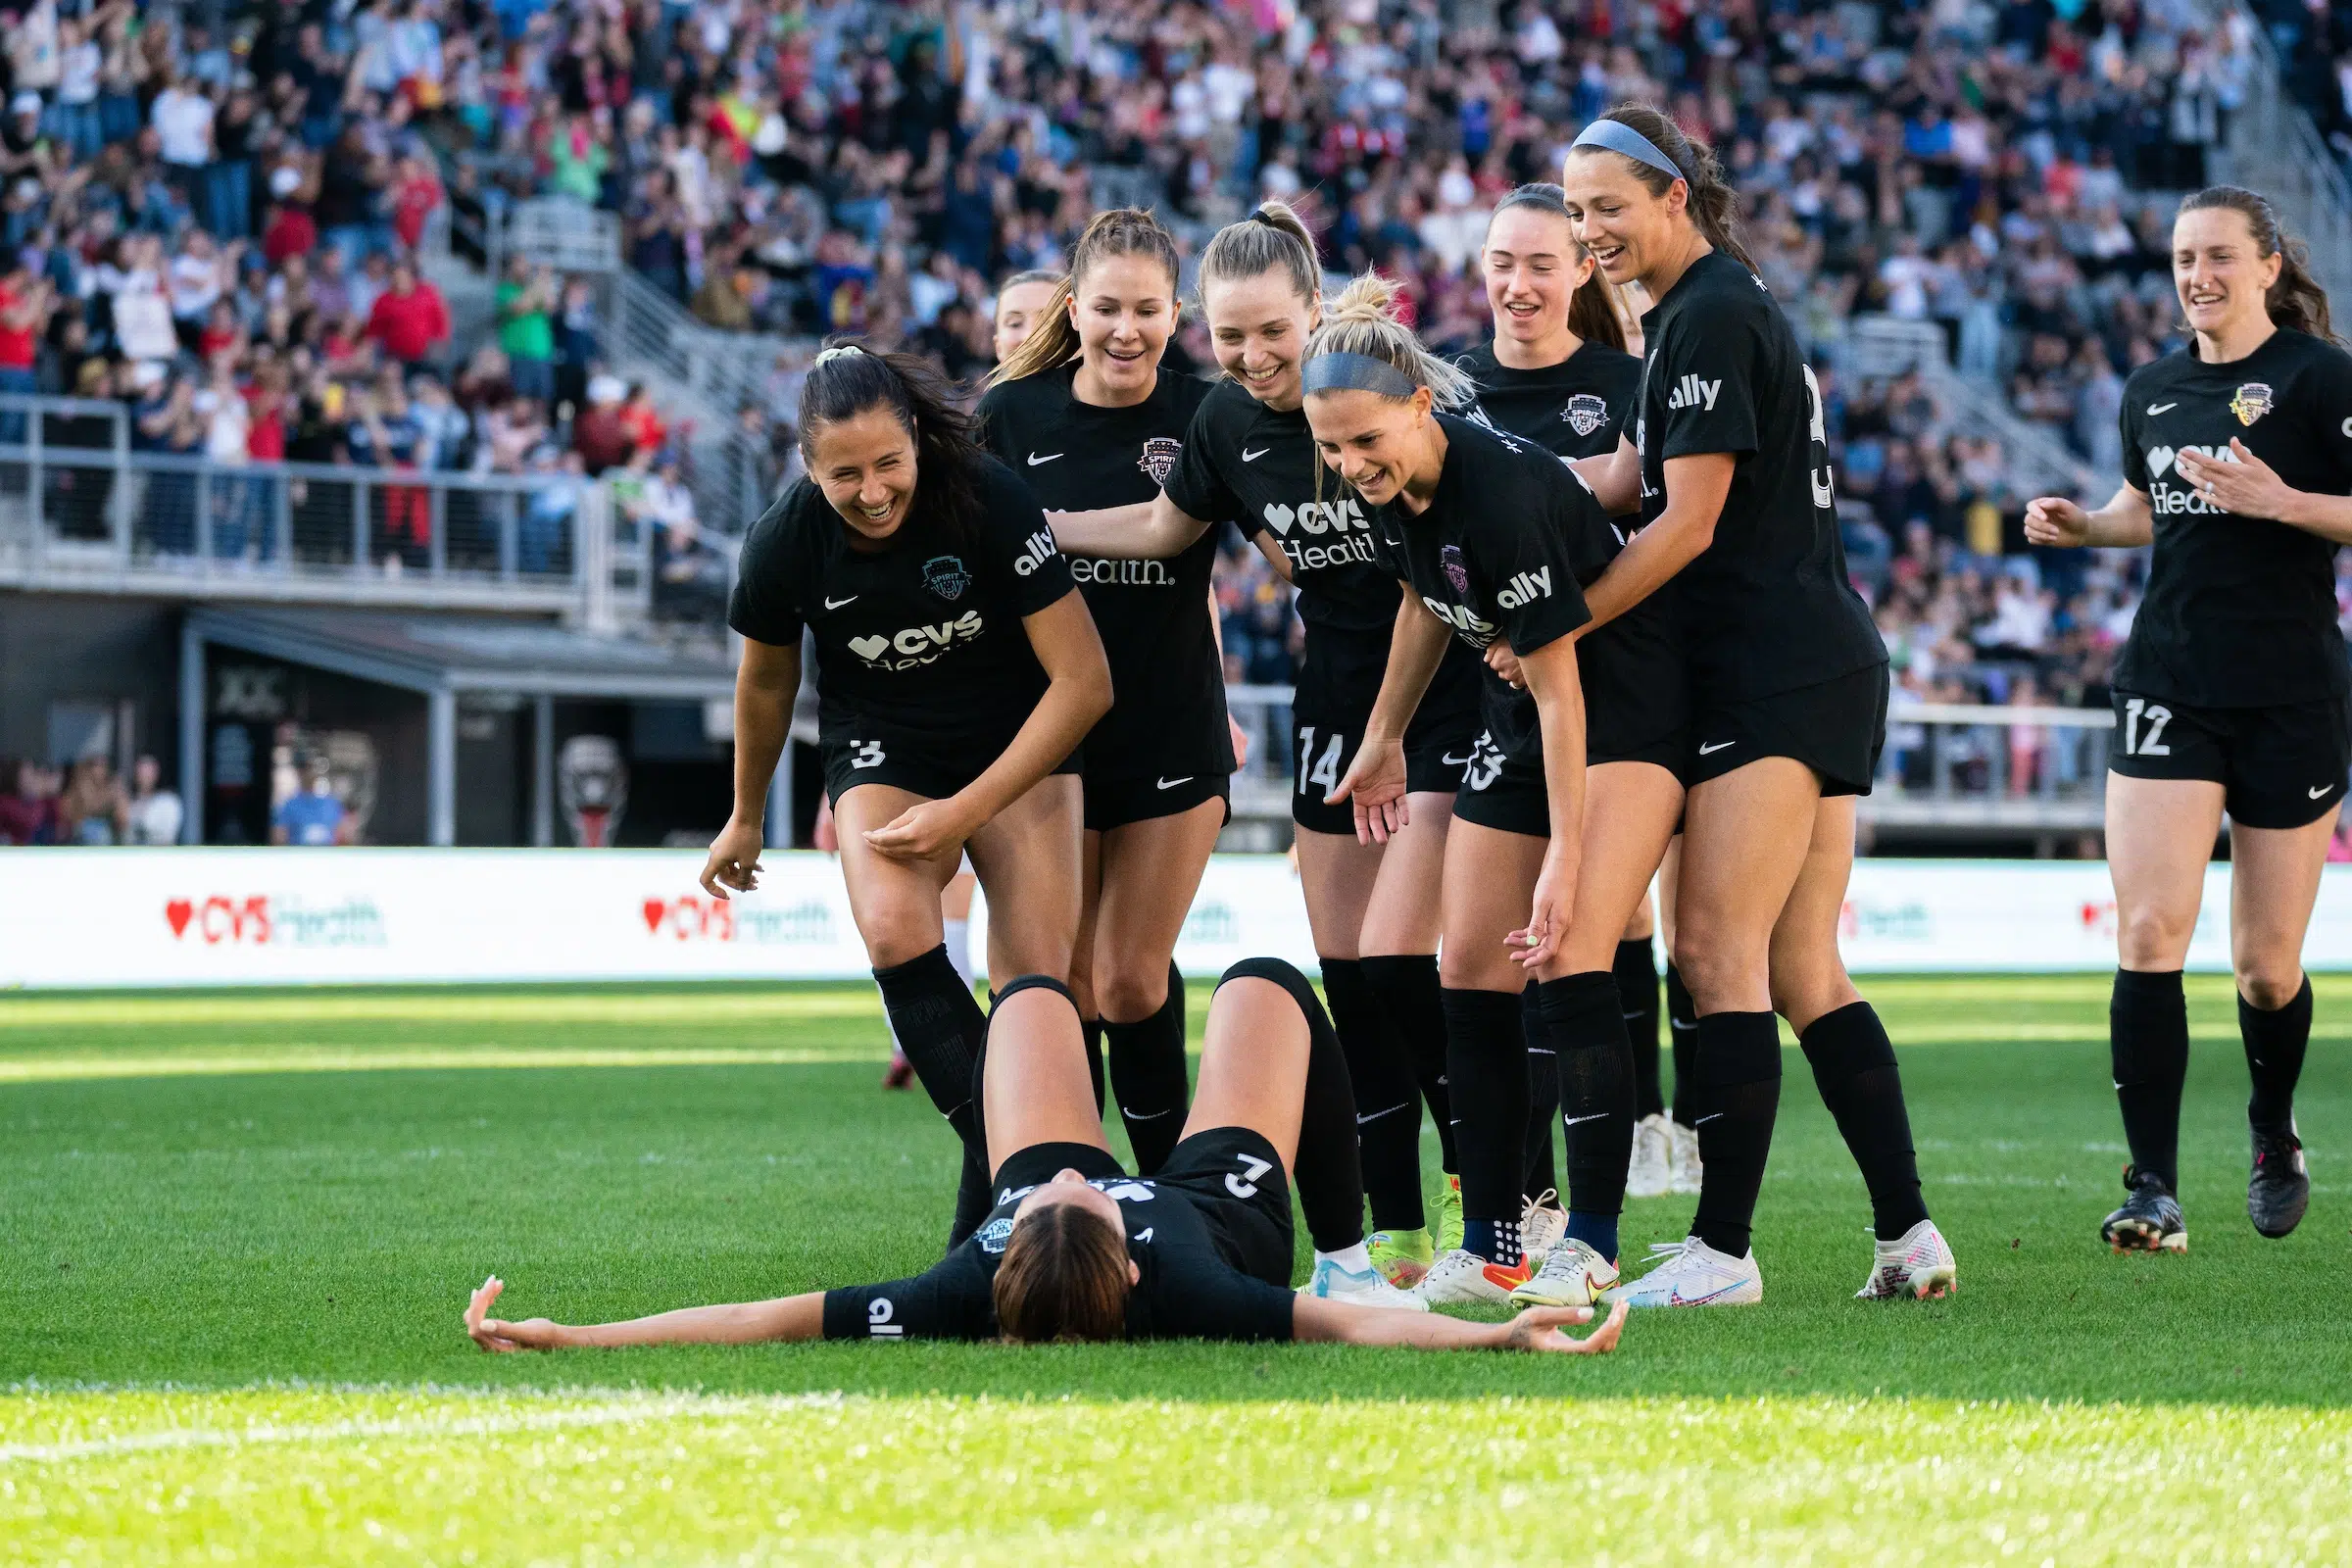 A group of soccer players in black uniforms smile and look down at their teammate who is sprawled on the ground laughing in celebration of a goal.